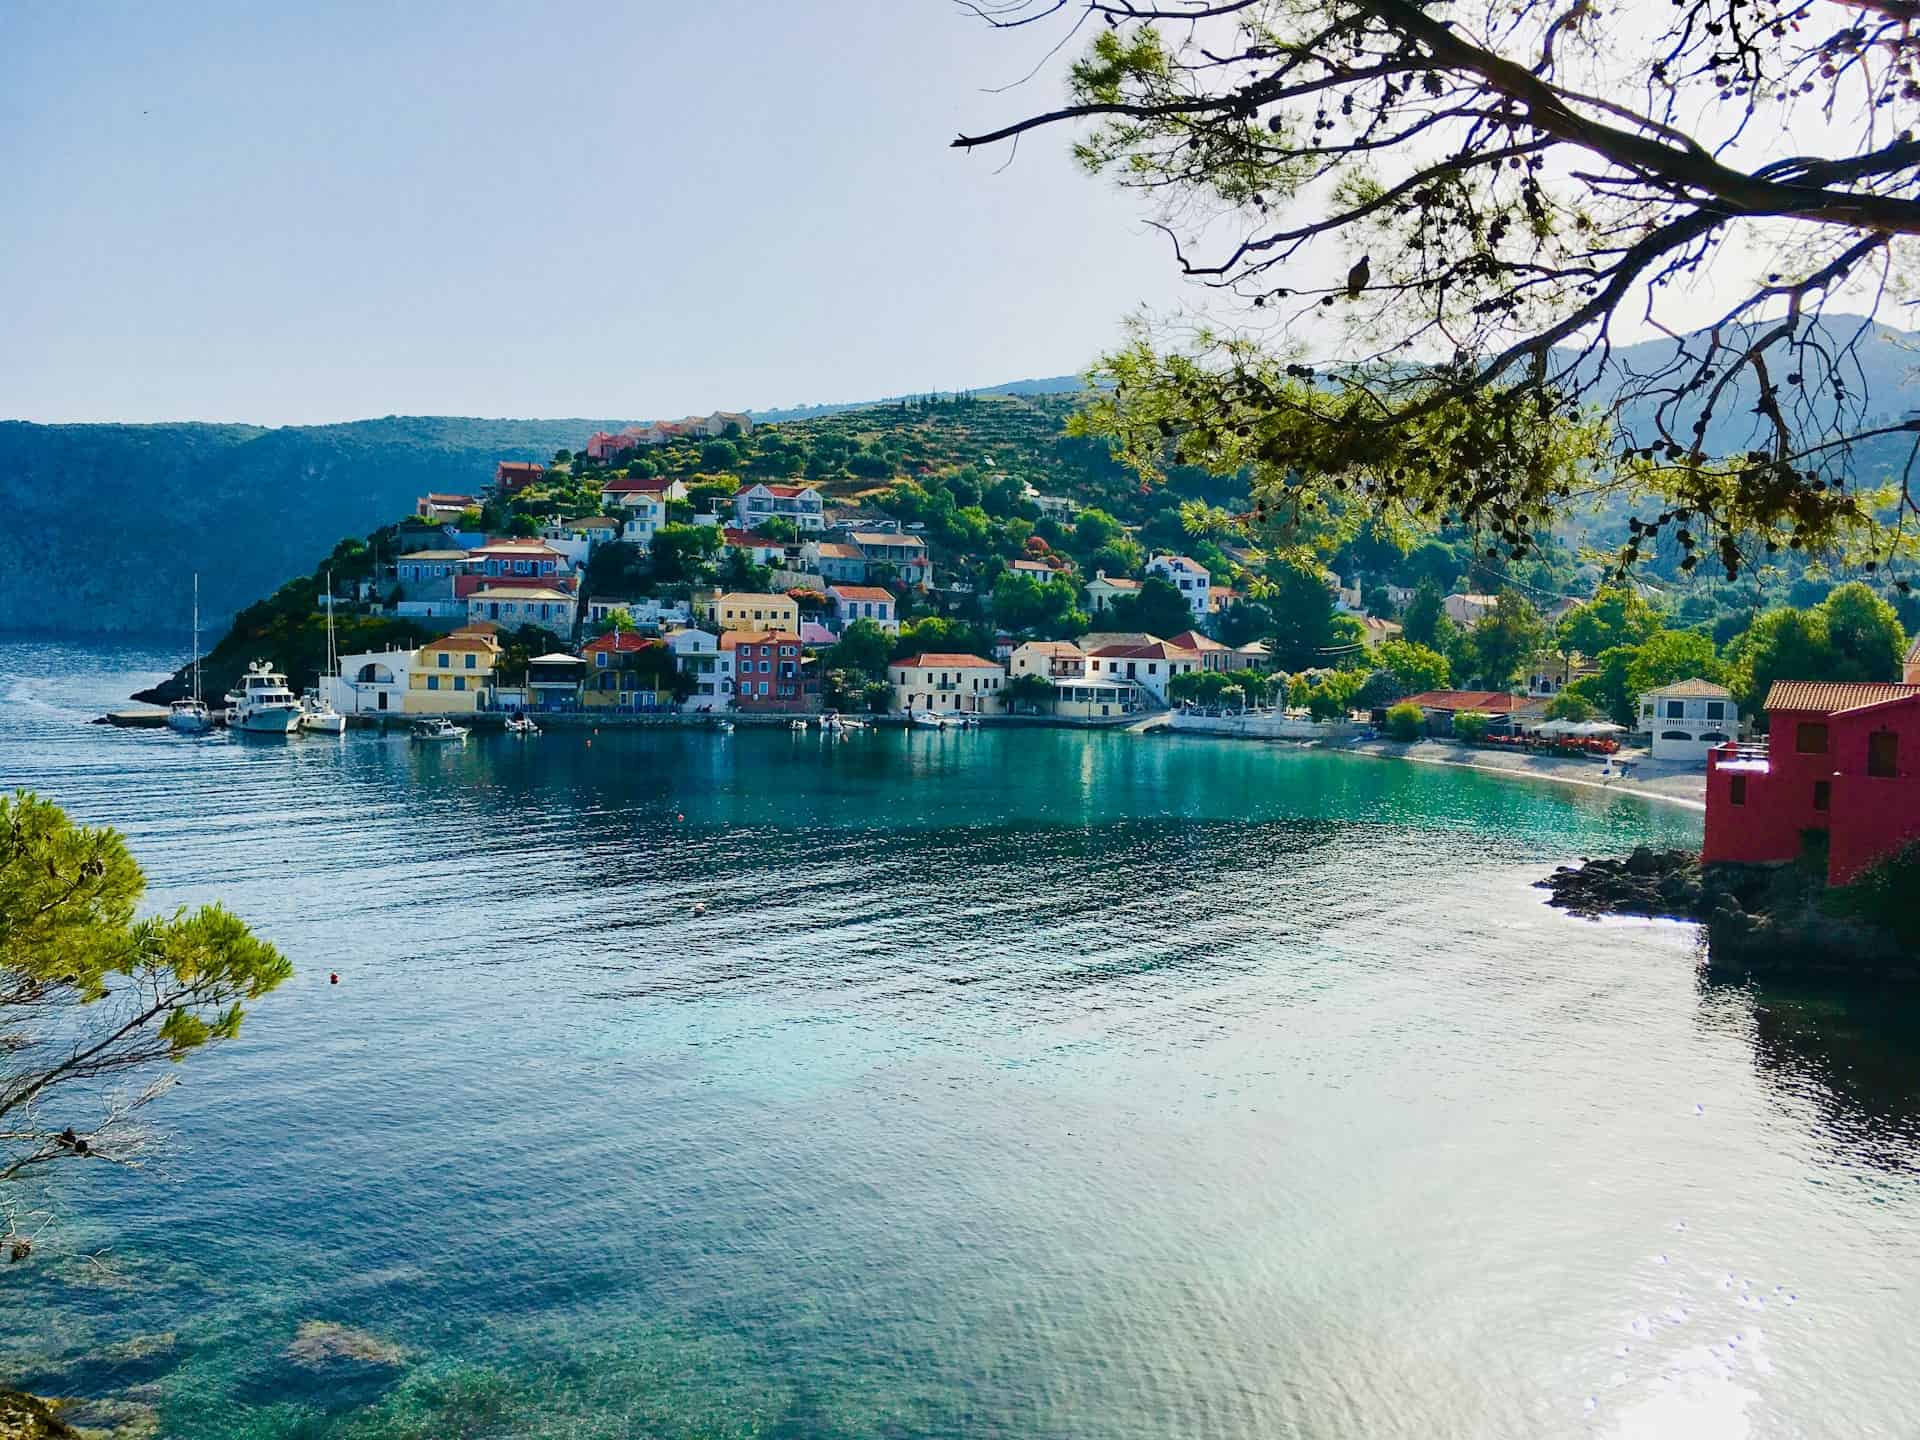 Accommodation in Kefalonia: The best places